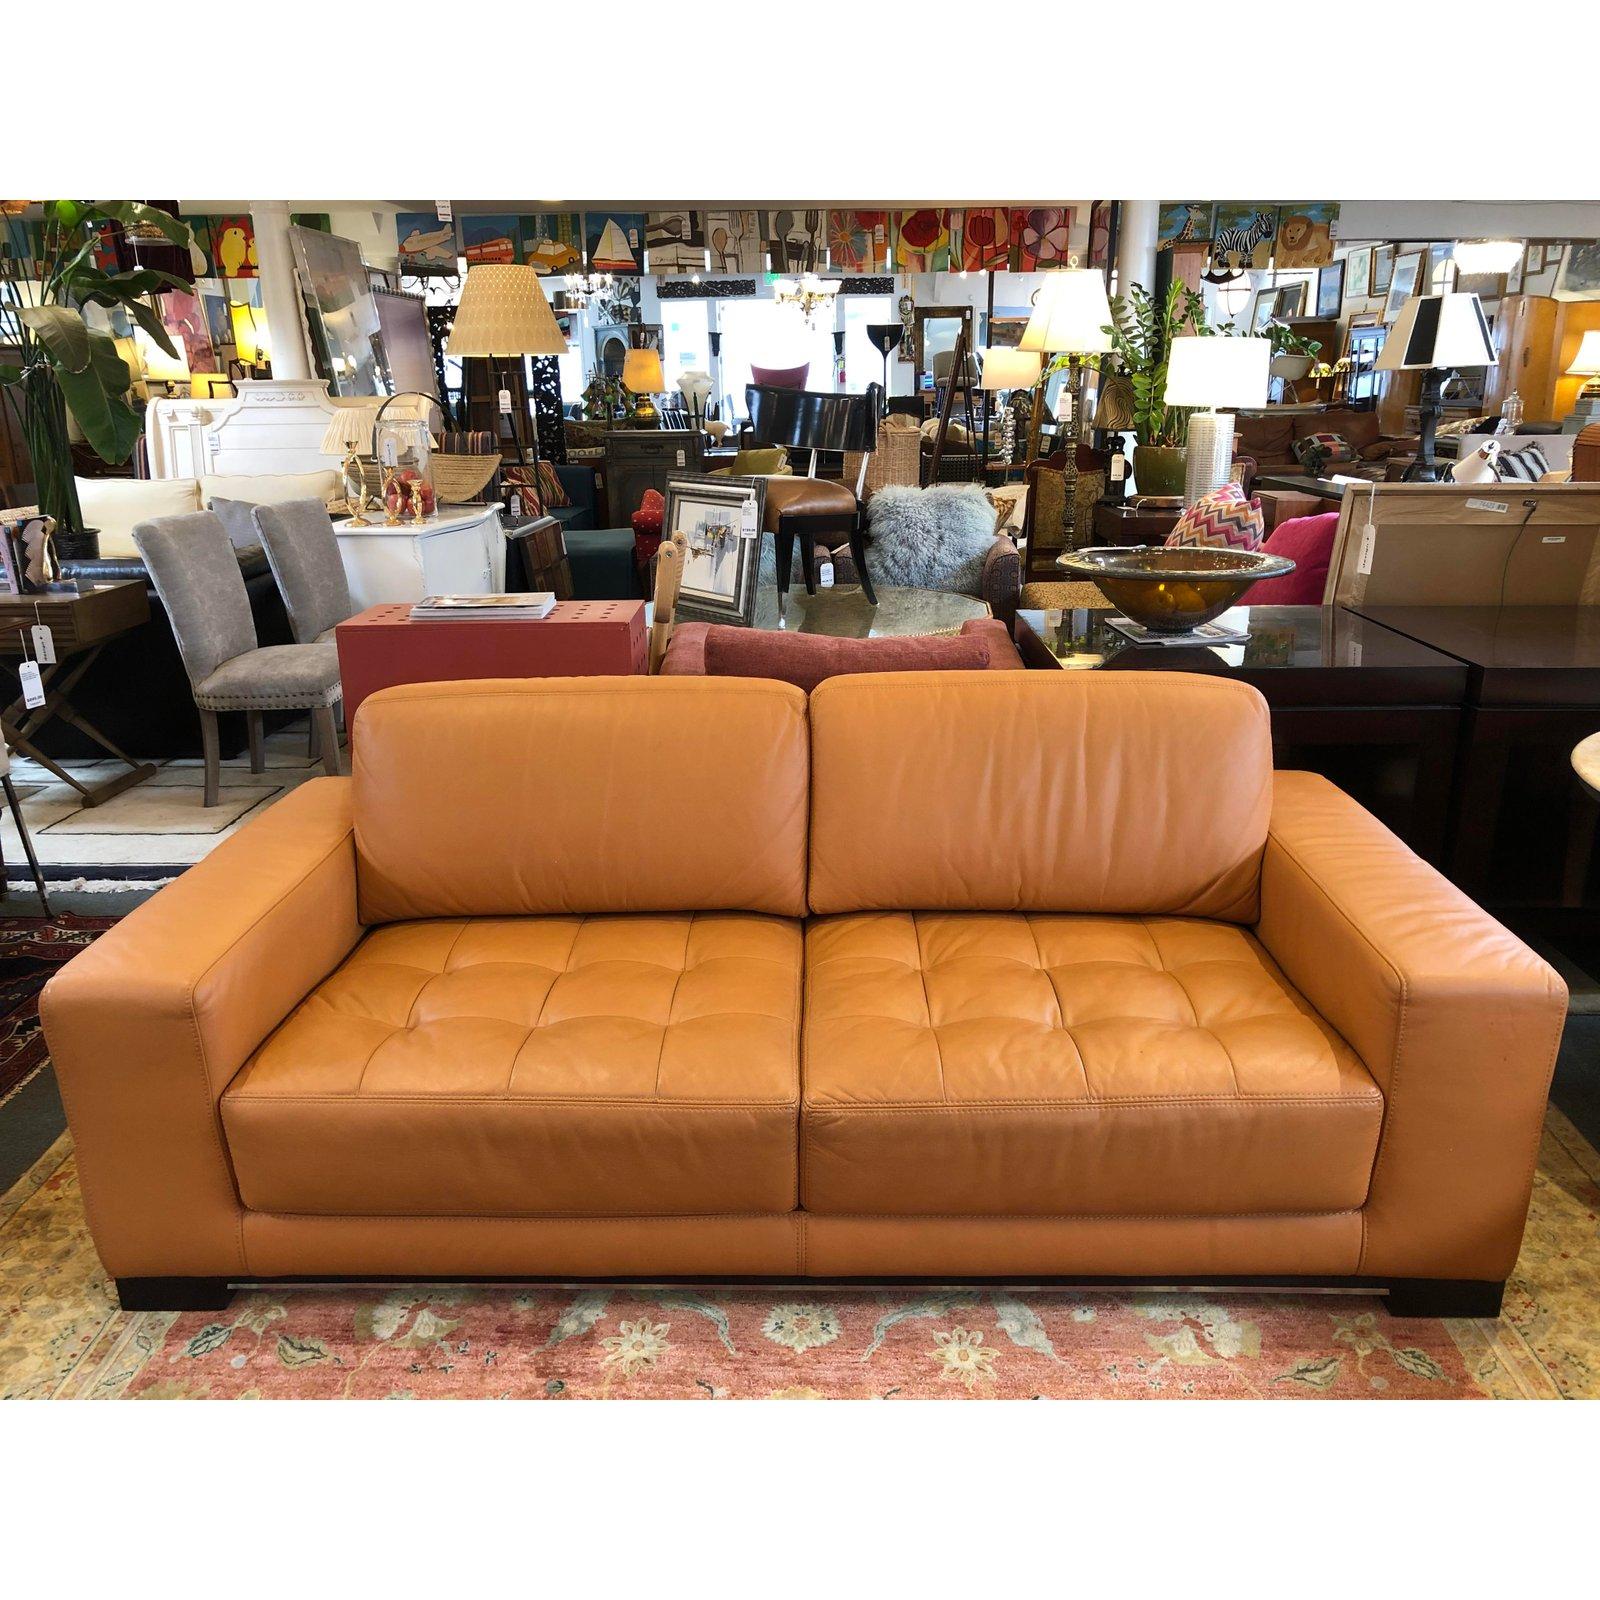 Carmel Leather Sofa by W. Schillig For Sale